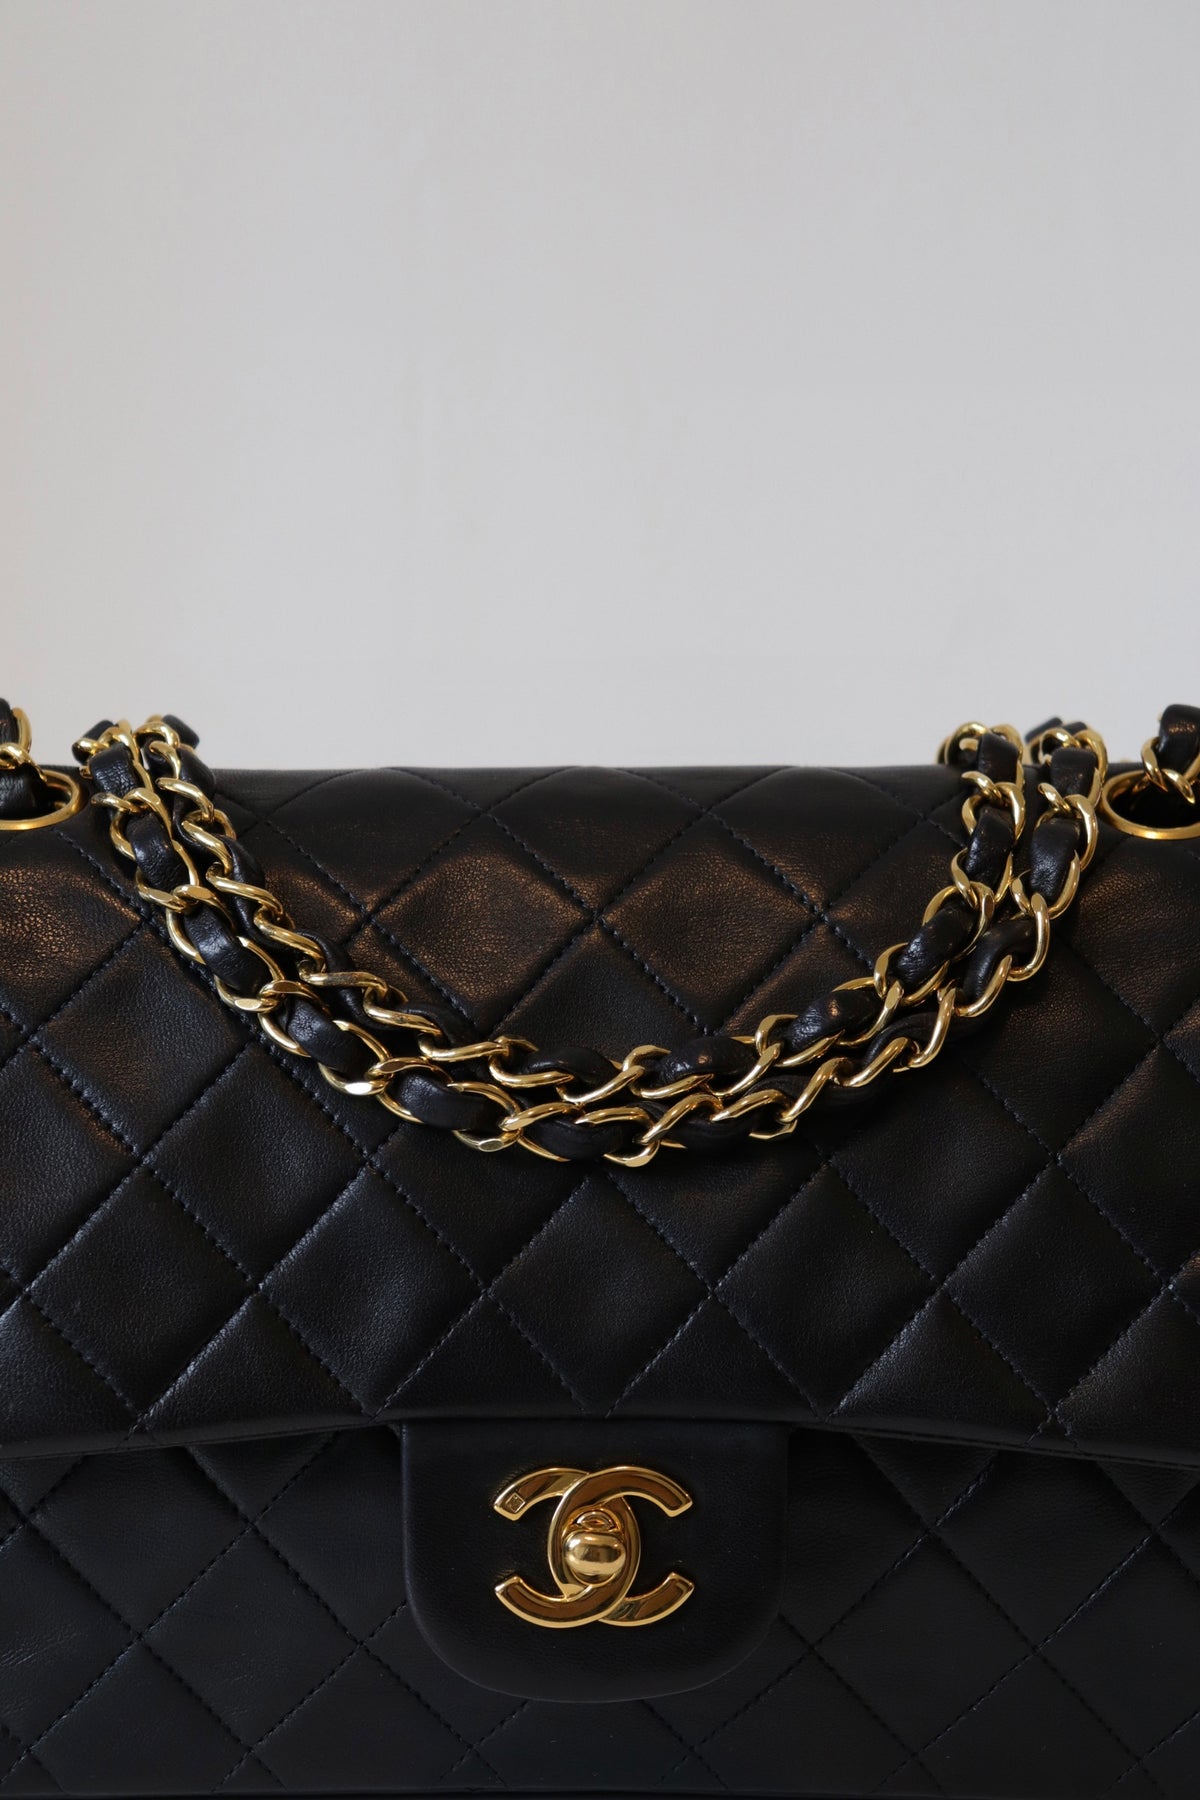 chanel lucky charm